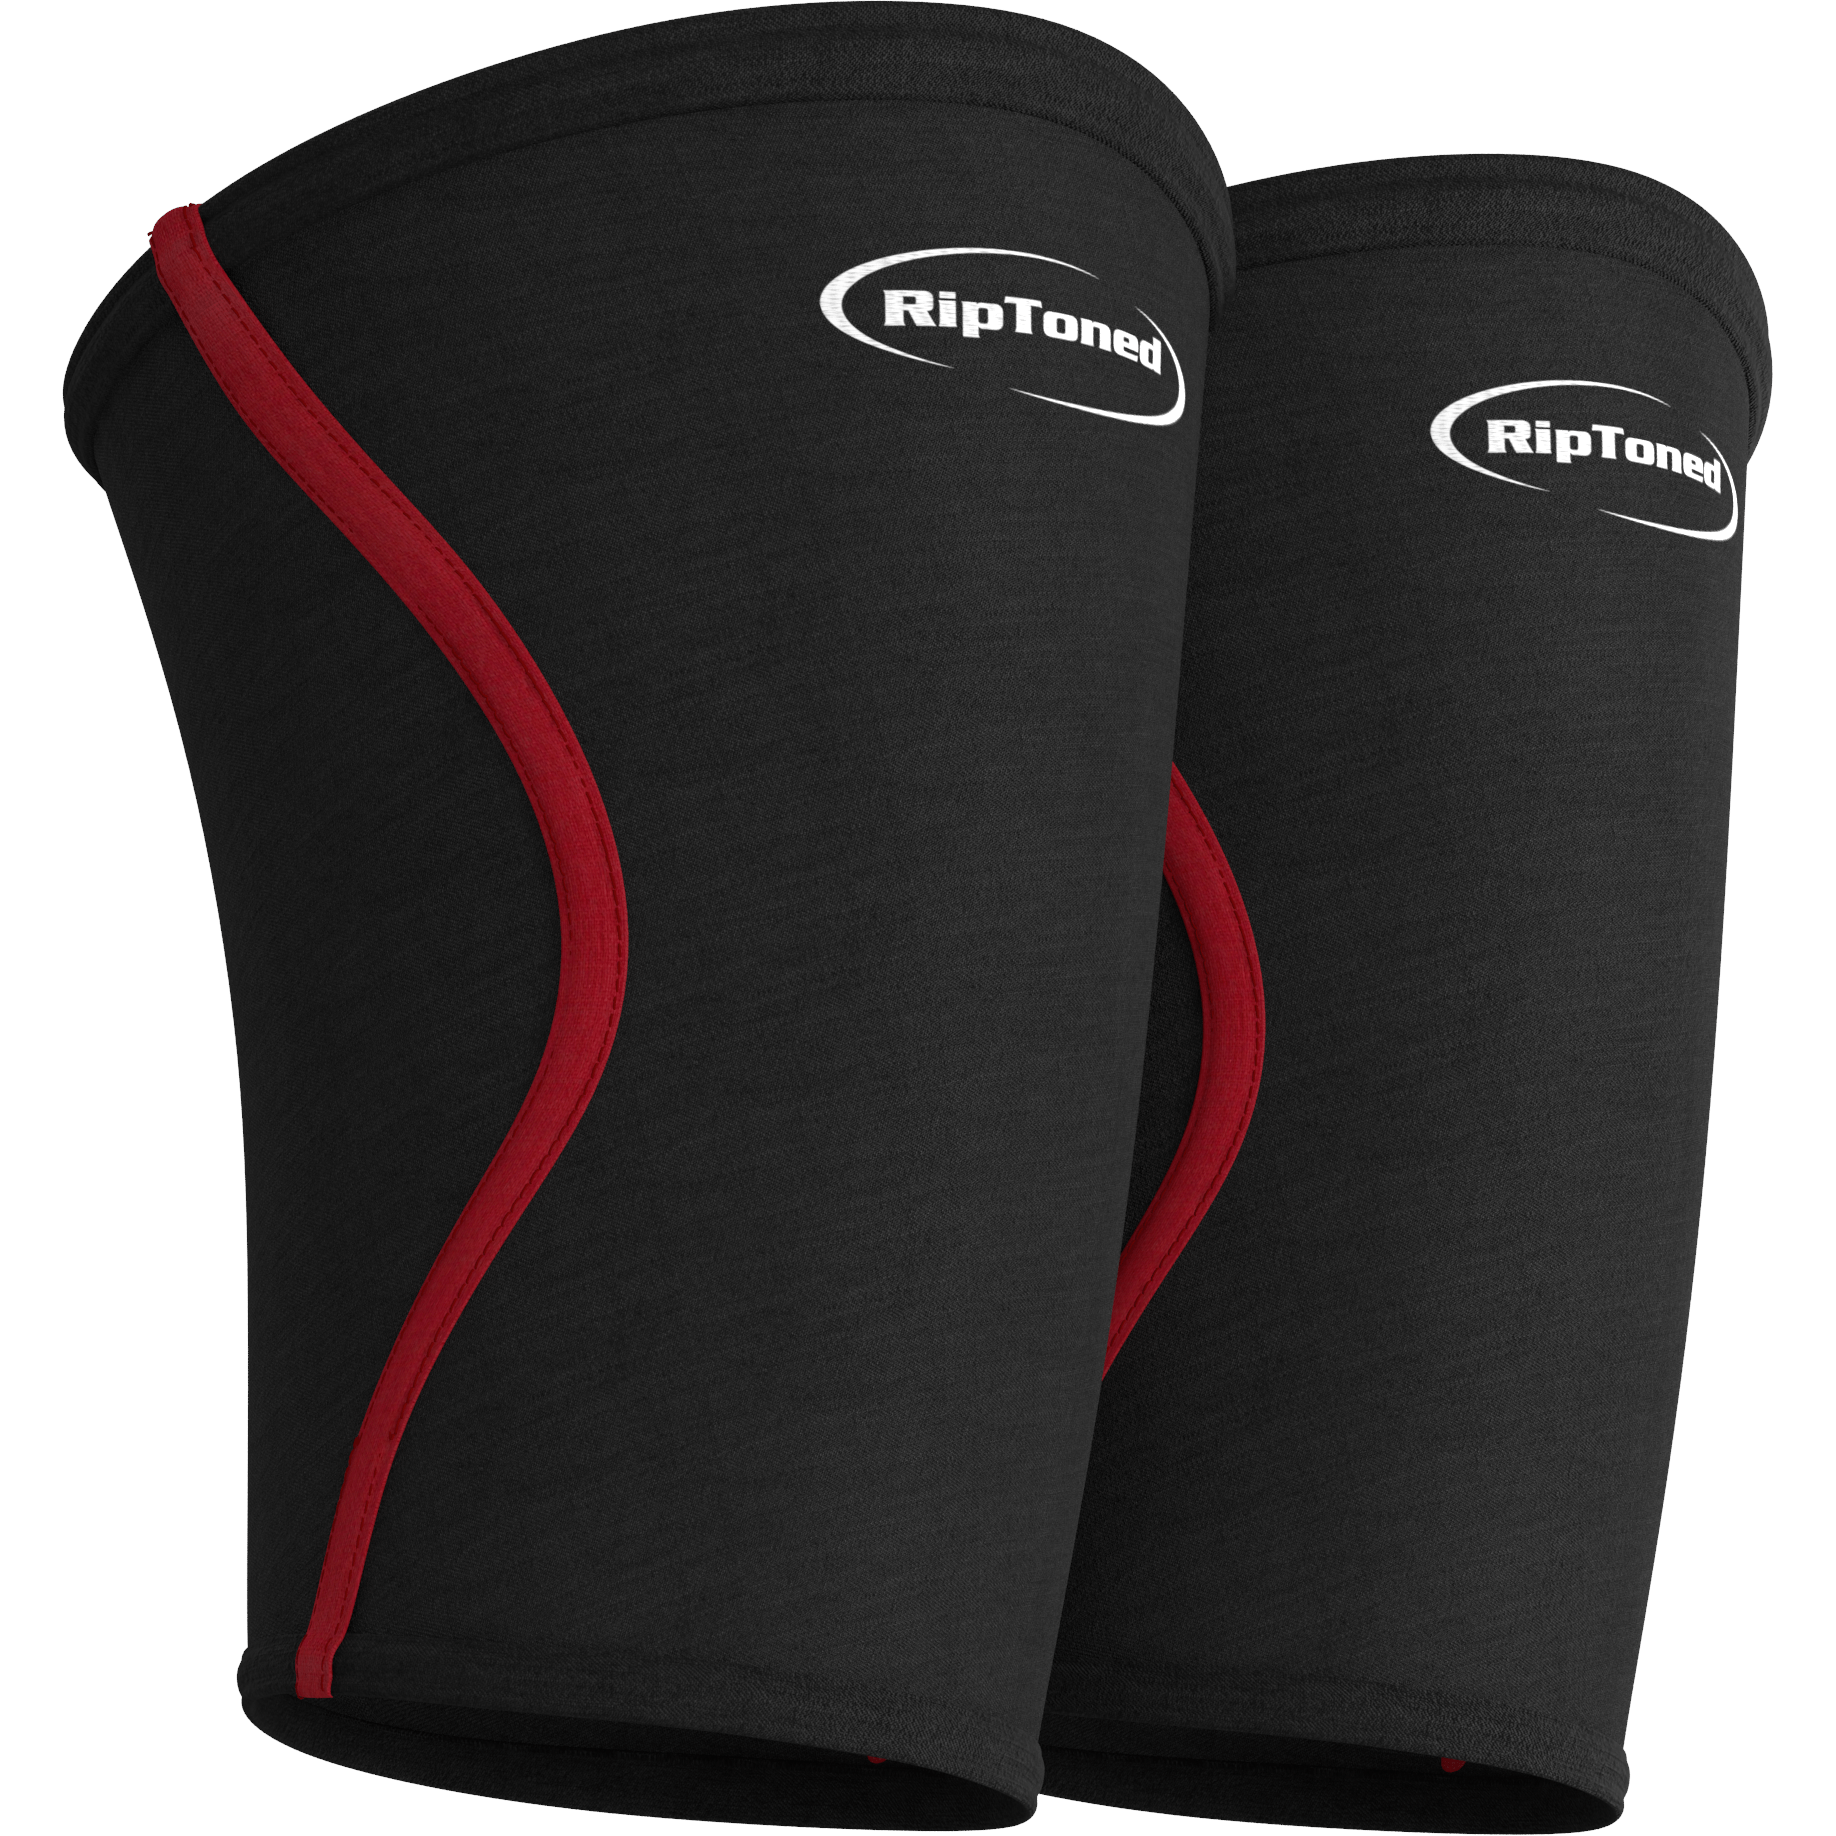 5mm Elbow Sleeves - Weightlifting, Crossfit, Squats, Strength